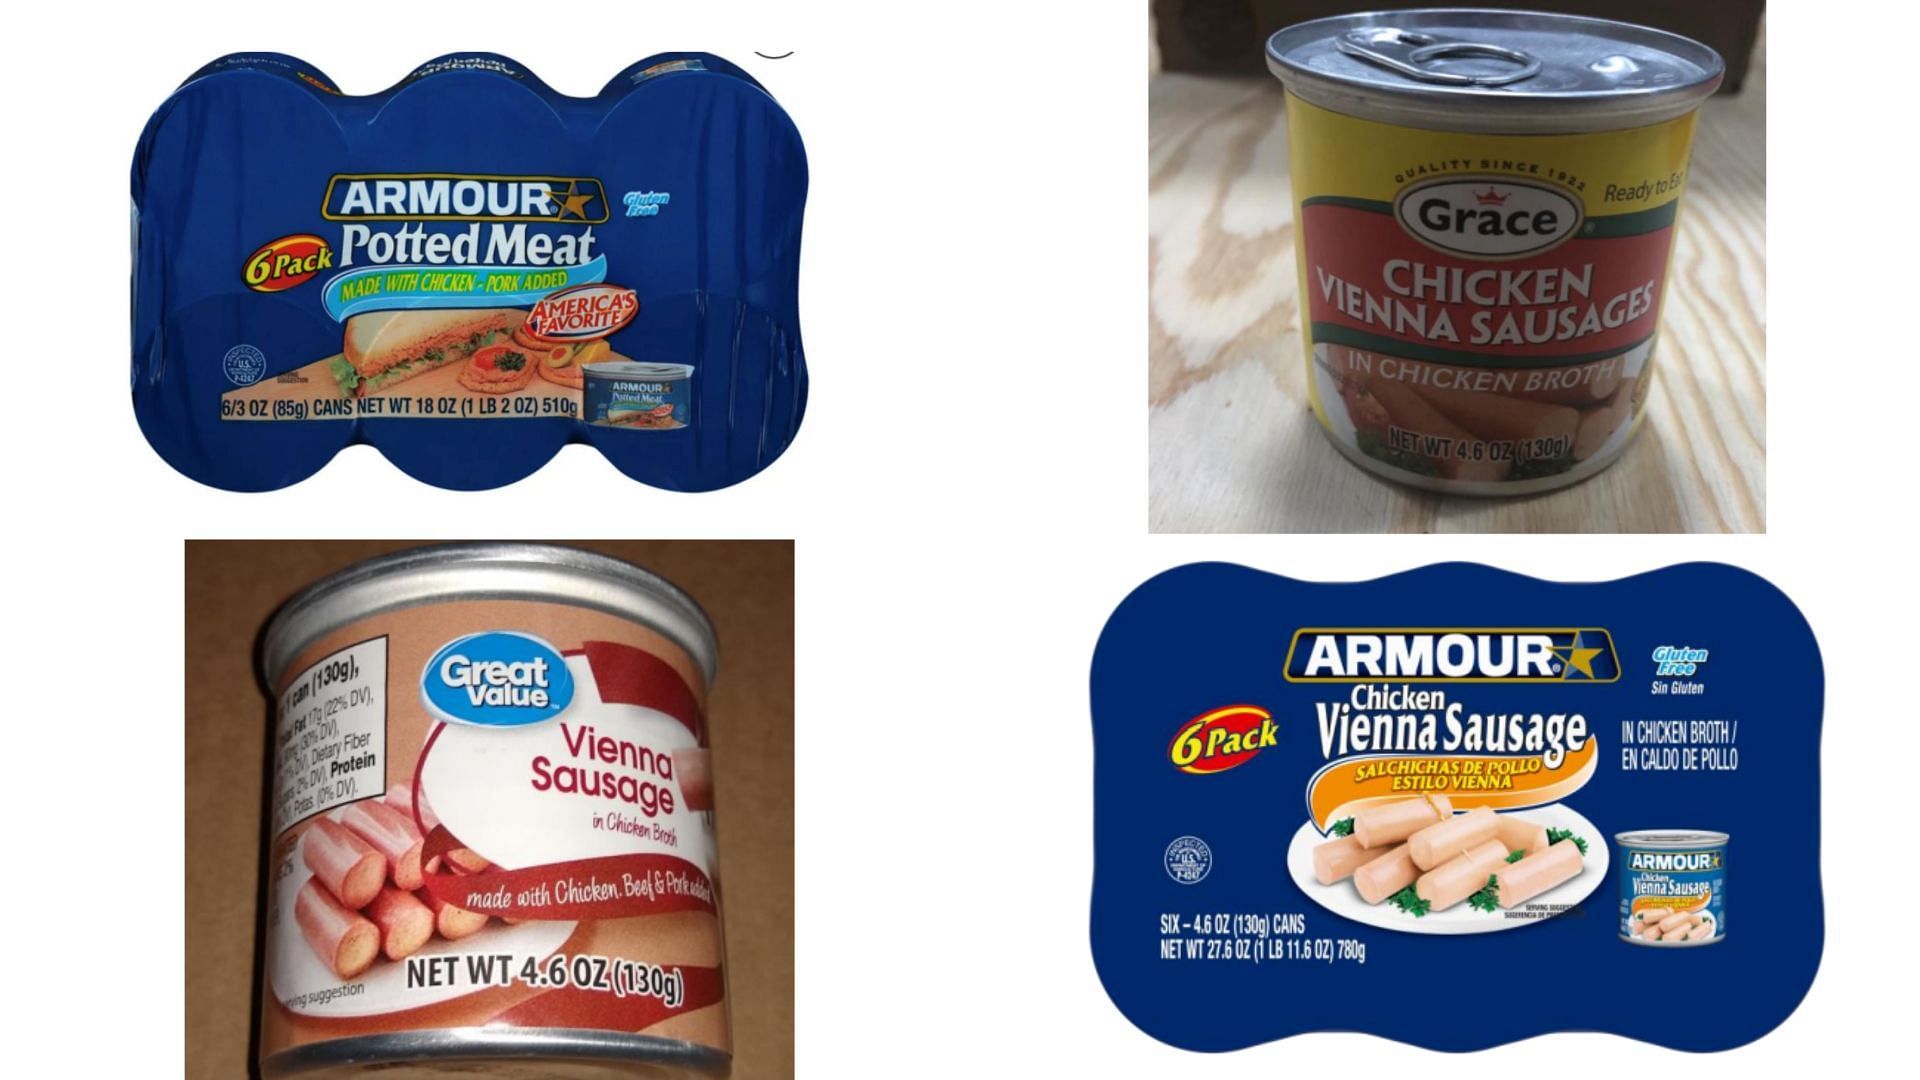 Packs and cans of the recalled Conagra Brands canned meat and poultry products (Image via FSIS)